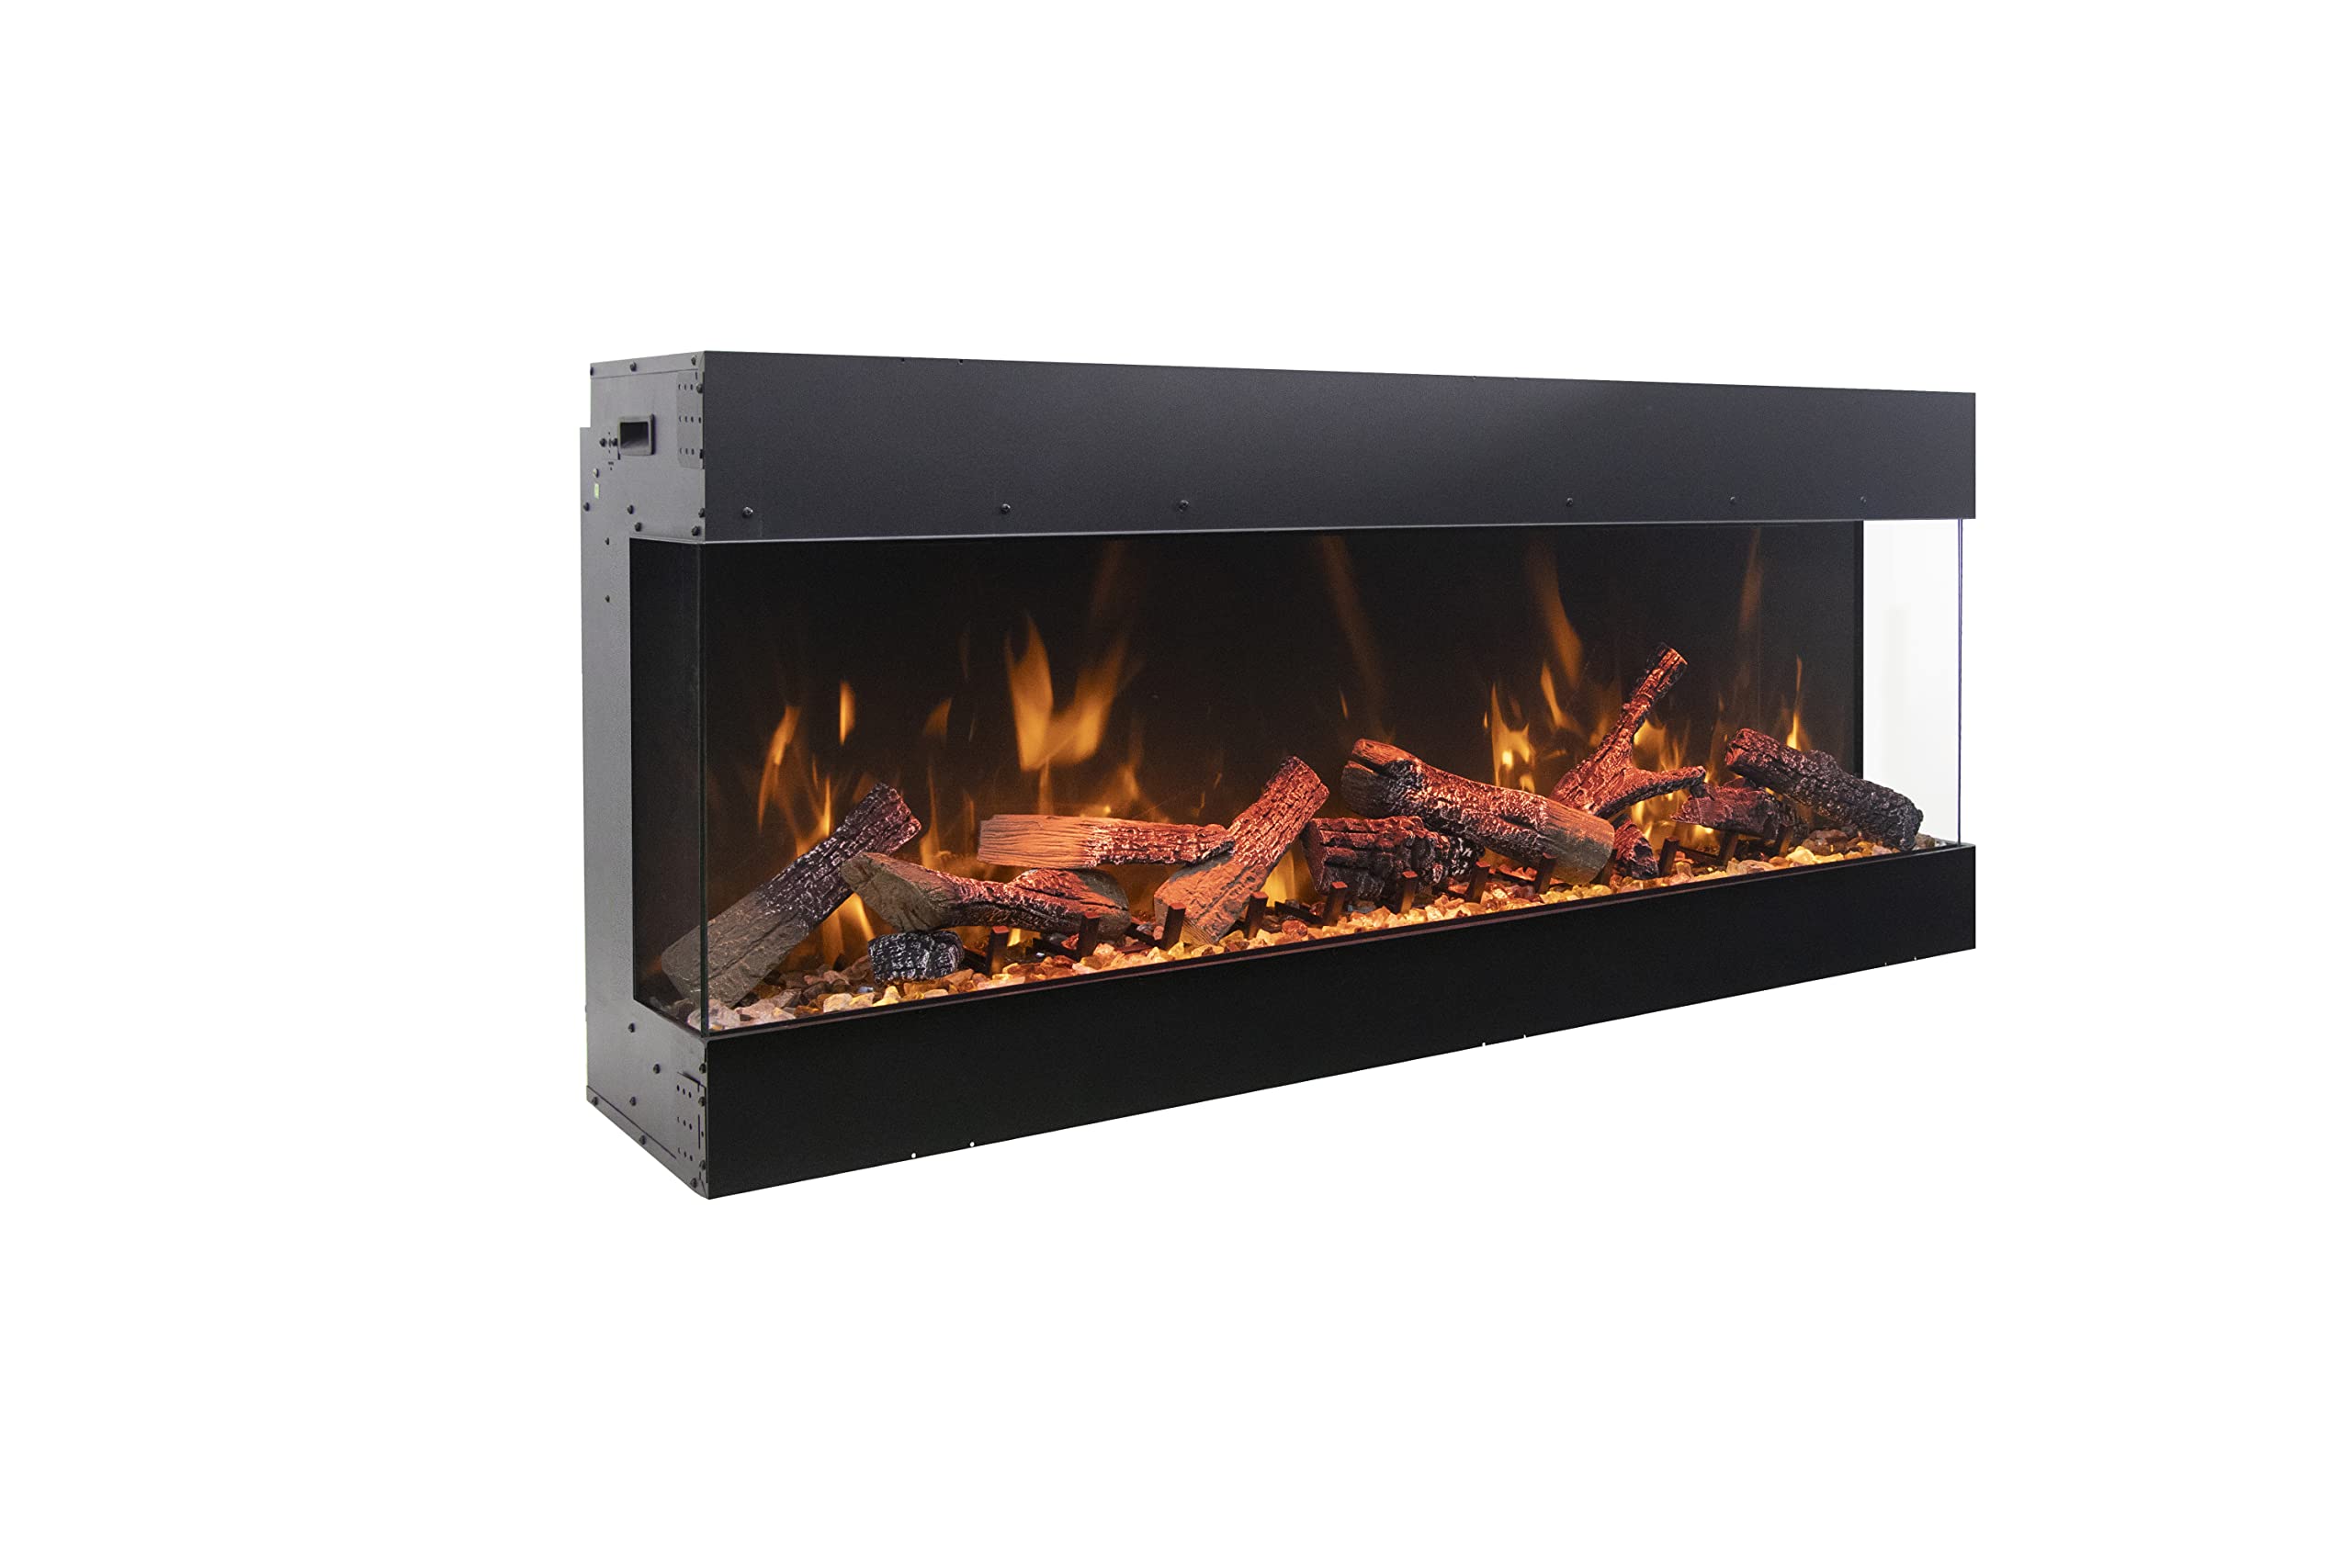 Tru View Bespoke  75? Indoor / Outdoor, WiFi Enabled, Bluetooth Capable 3 Sided Fireplace  Featuring a Glass Viewing Height of